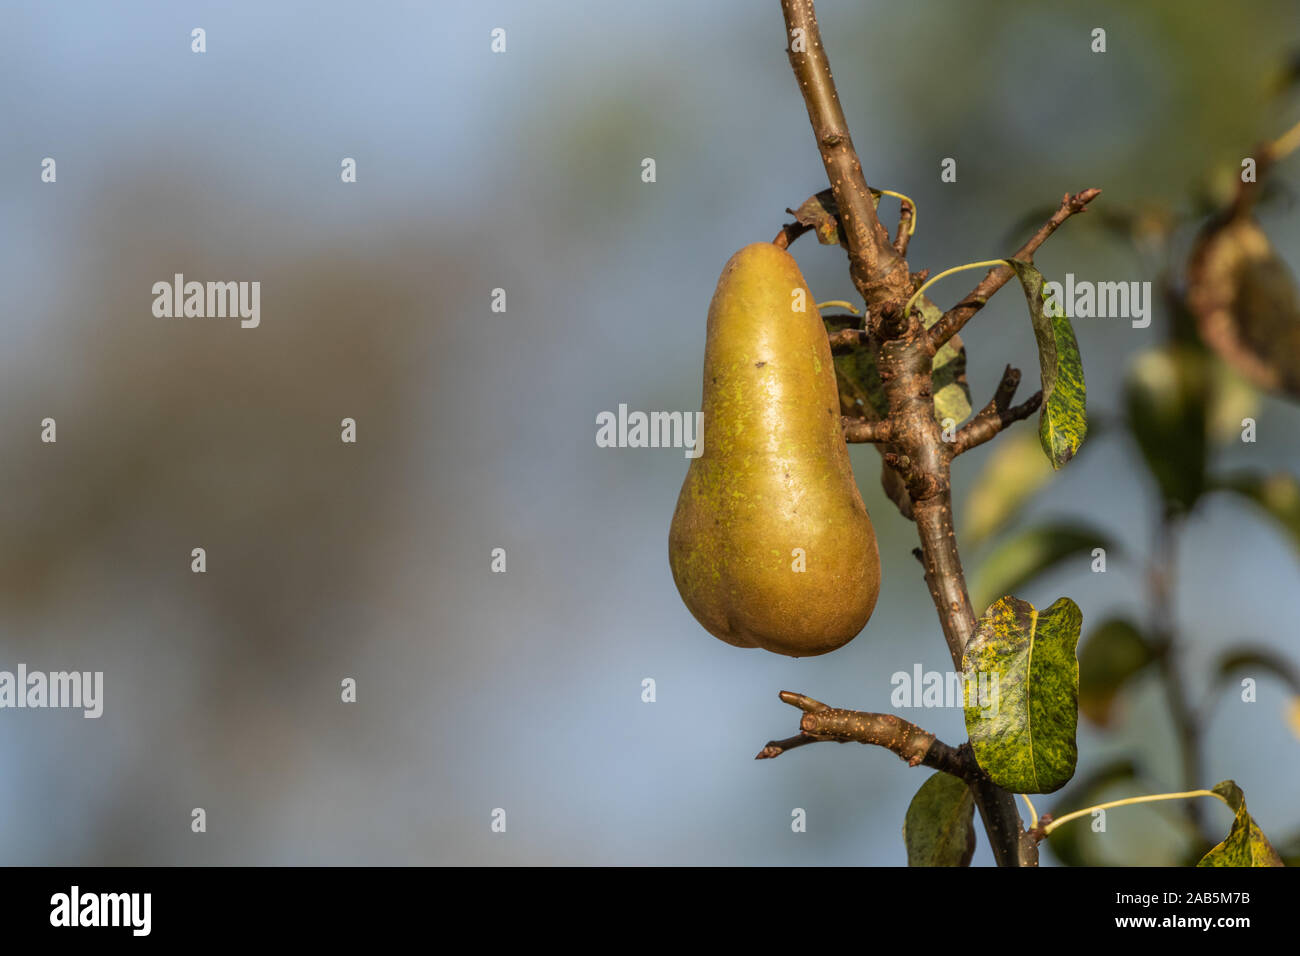 A single conference pear on a pear tree. Stock Photo